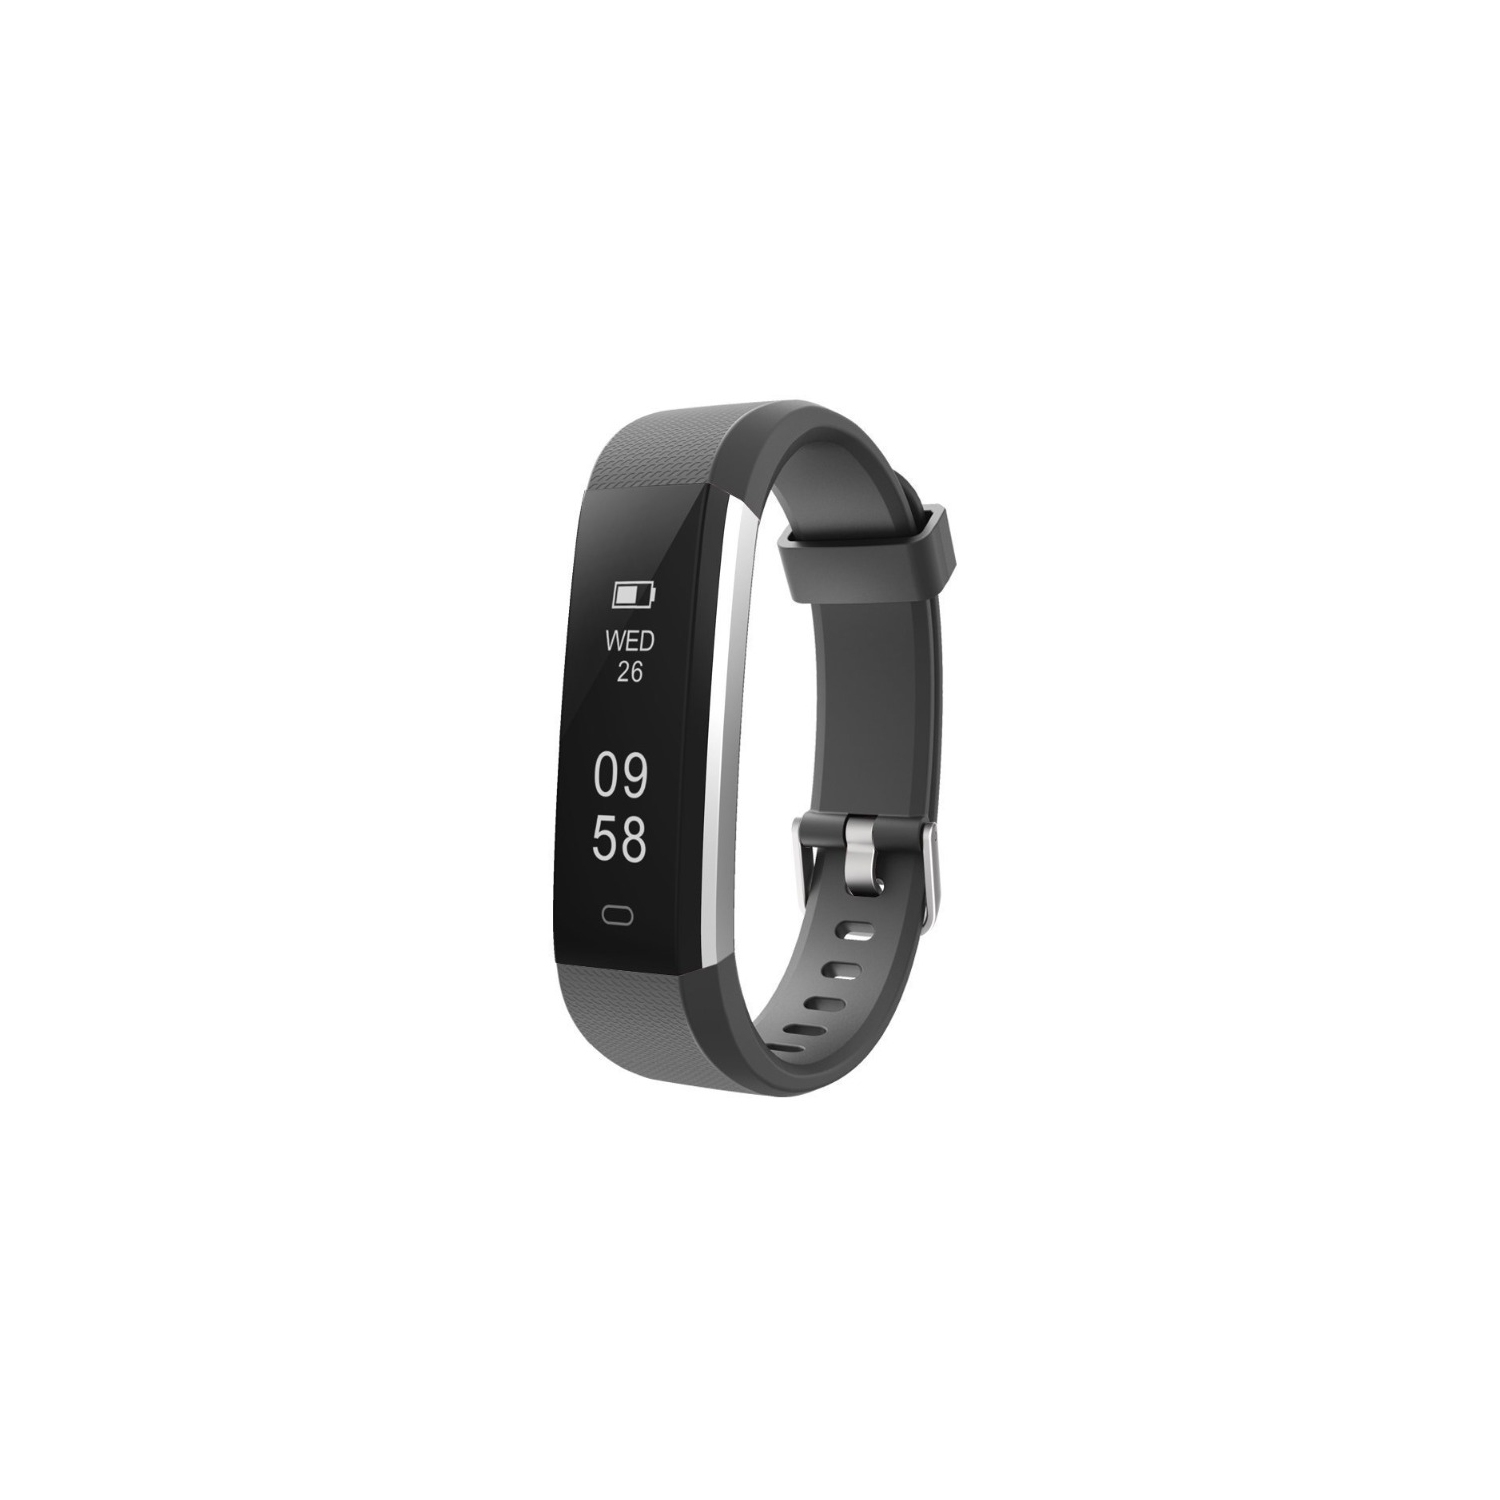 Letscom ID115 Health and Fitness Tracker by Letsfit - Black/Gray